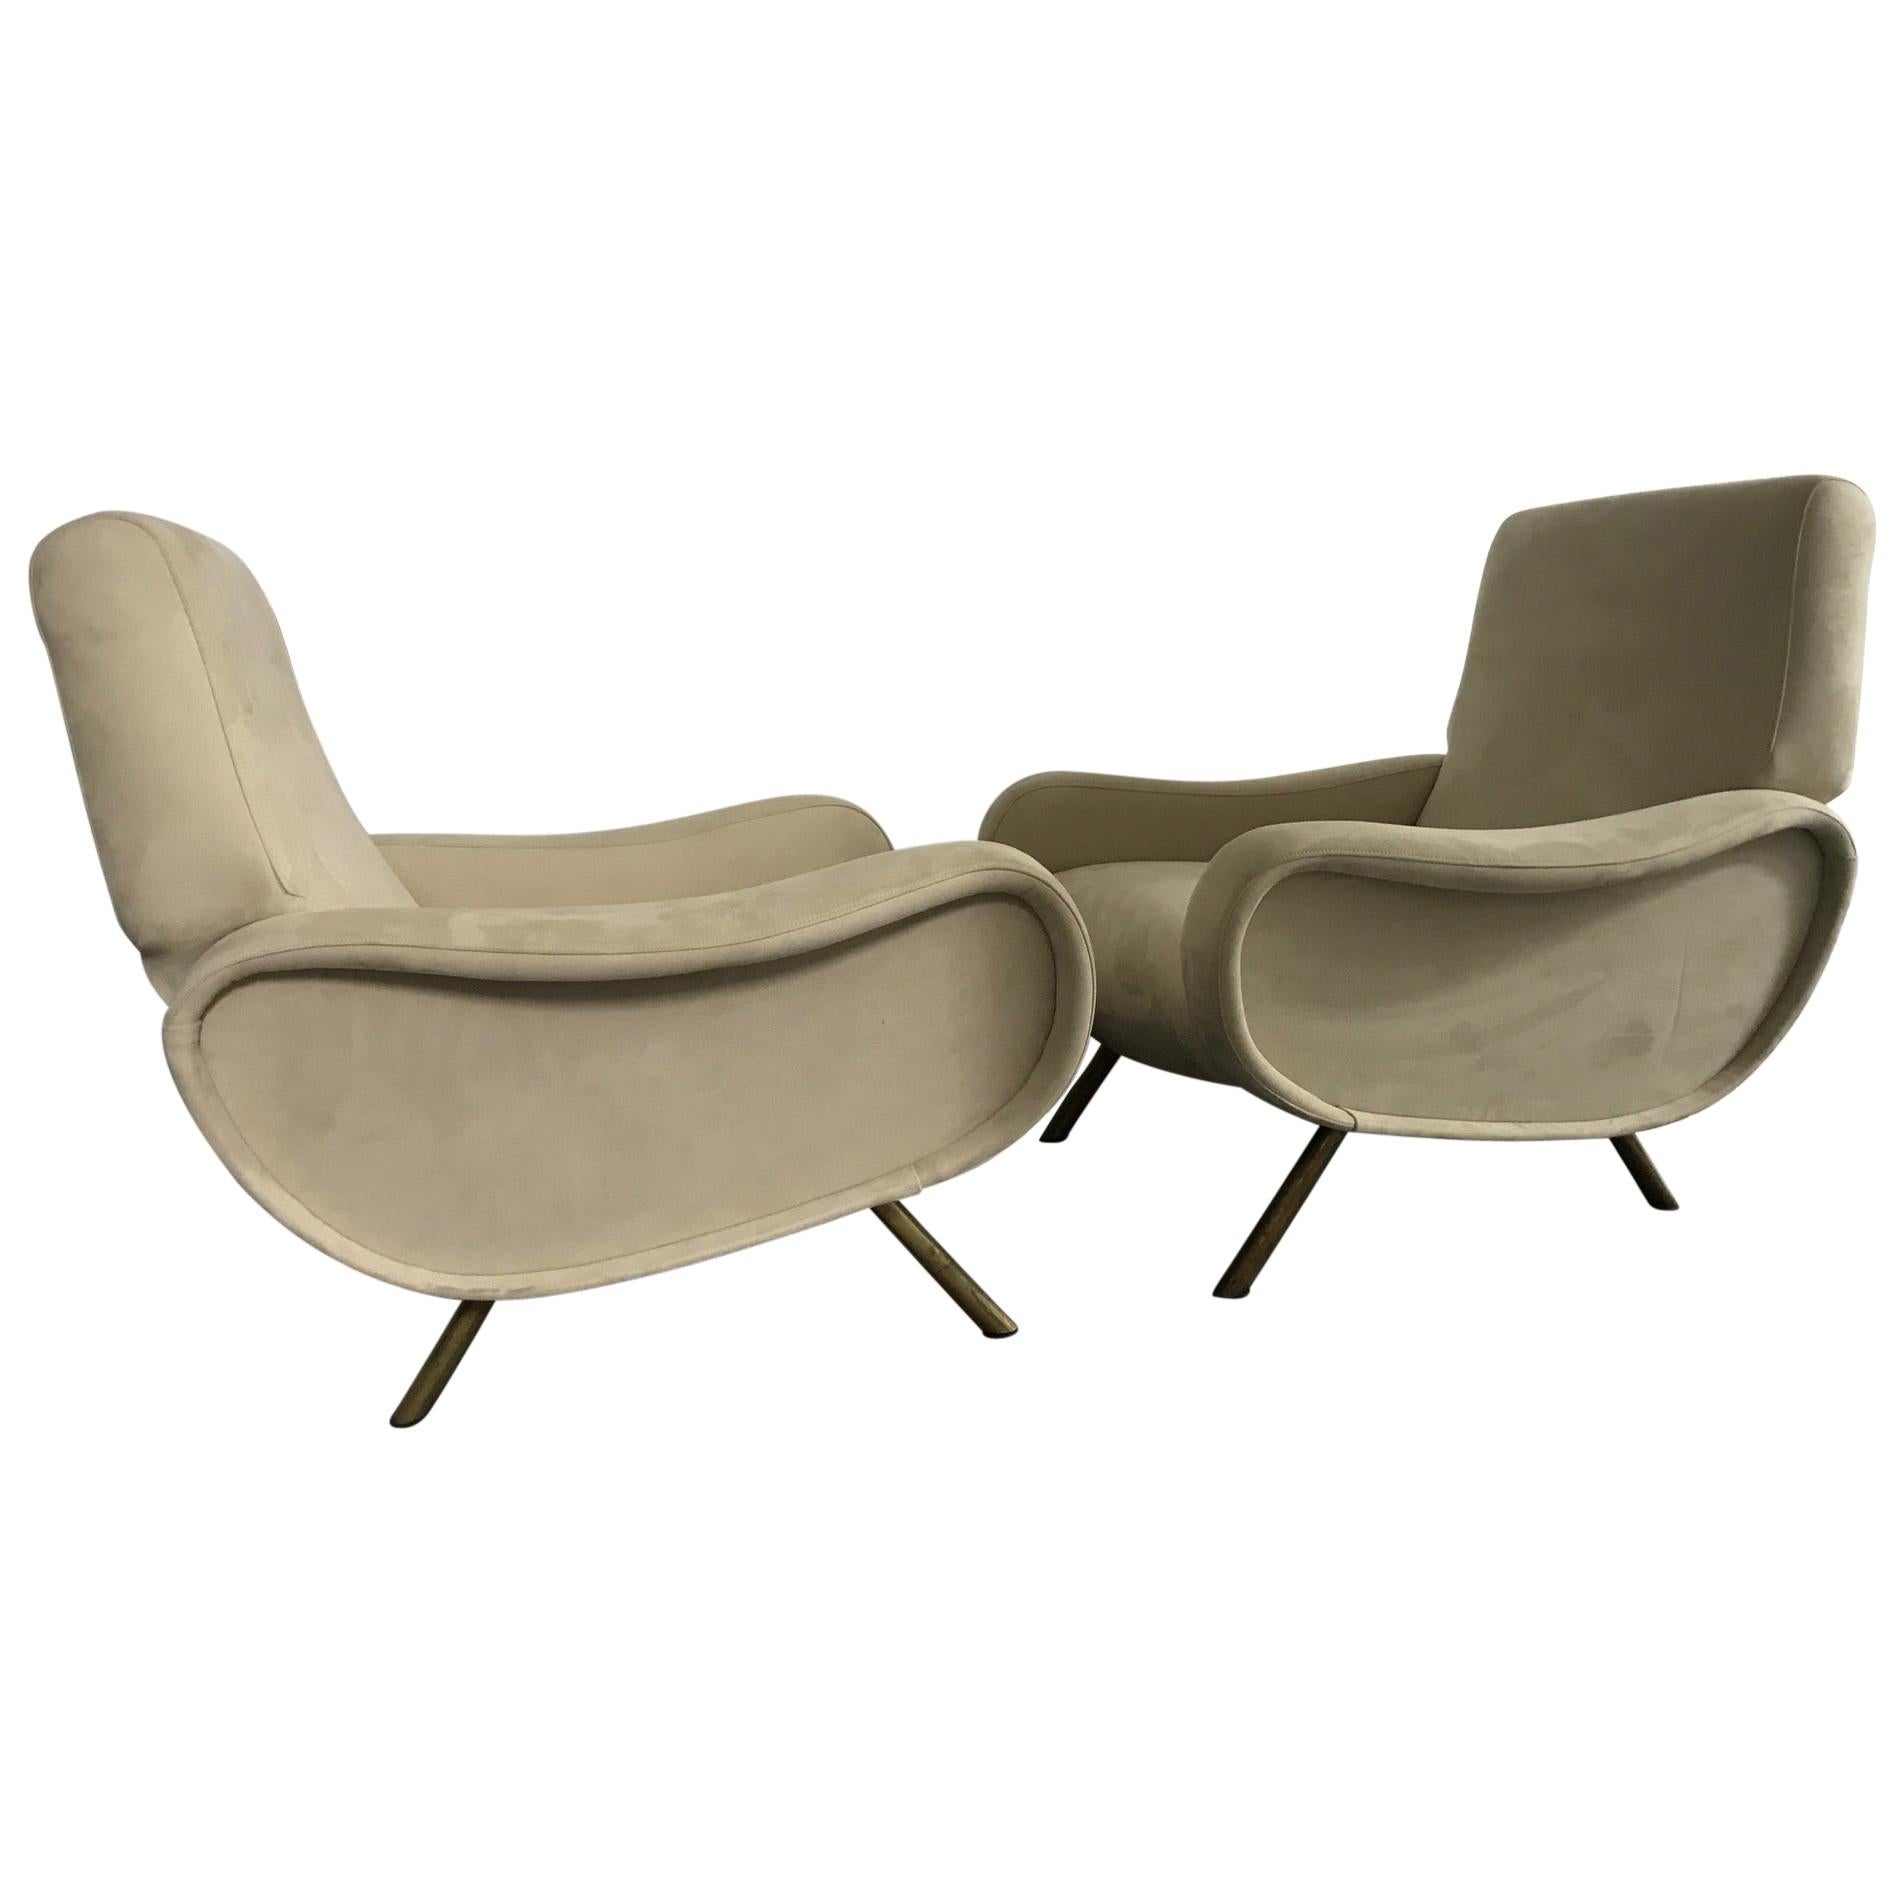 Pair of "Lady" Armchairs by Marco Zanuso for Arflex, Italy, 1950s